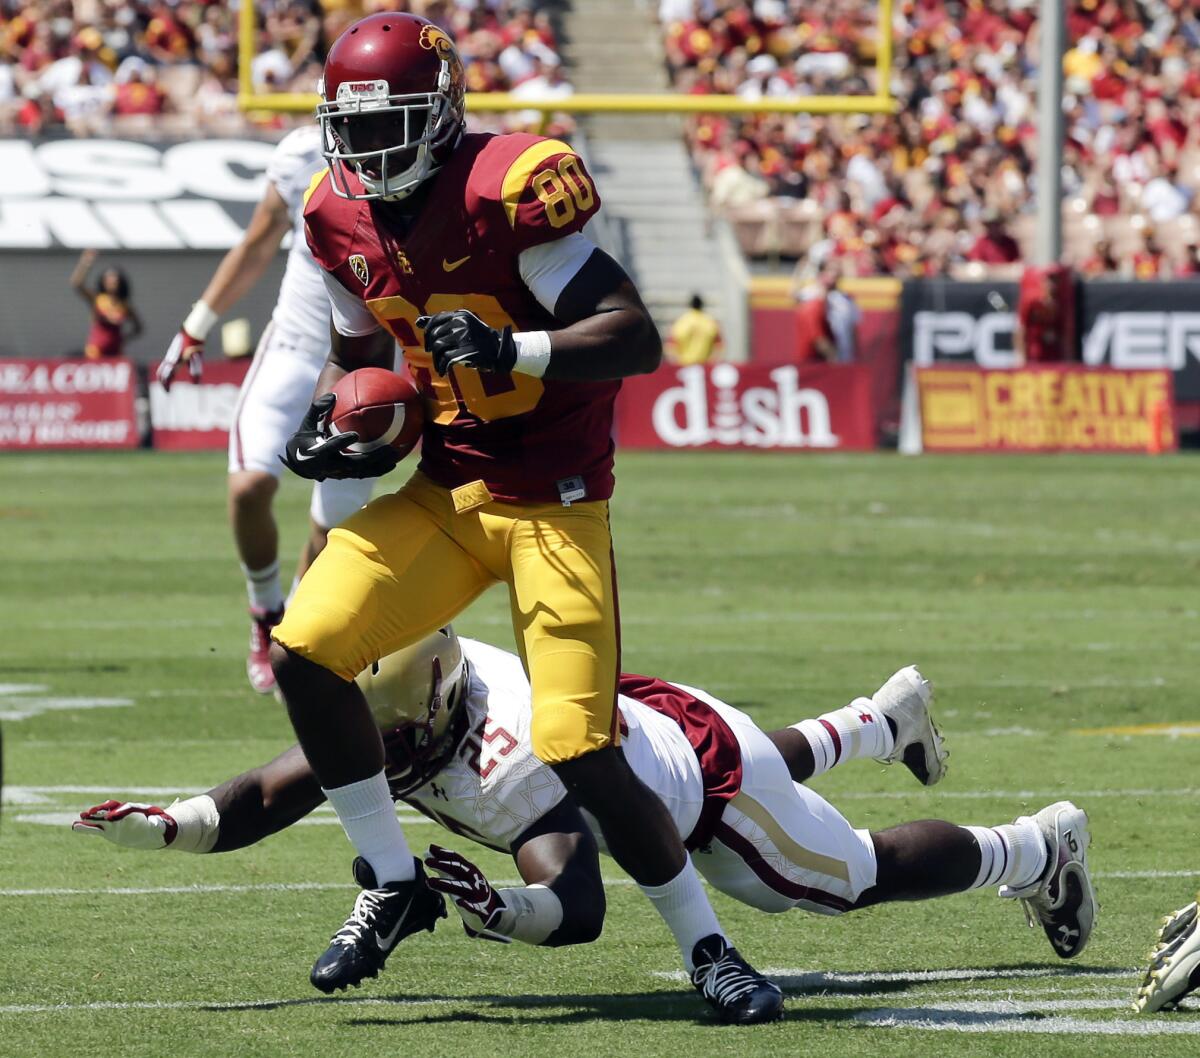 USC wide receiver De'Von Flournoy breaks away from Boston College linebacker Josh Keyes in the first half of their game Saturday at the Coliseum.